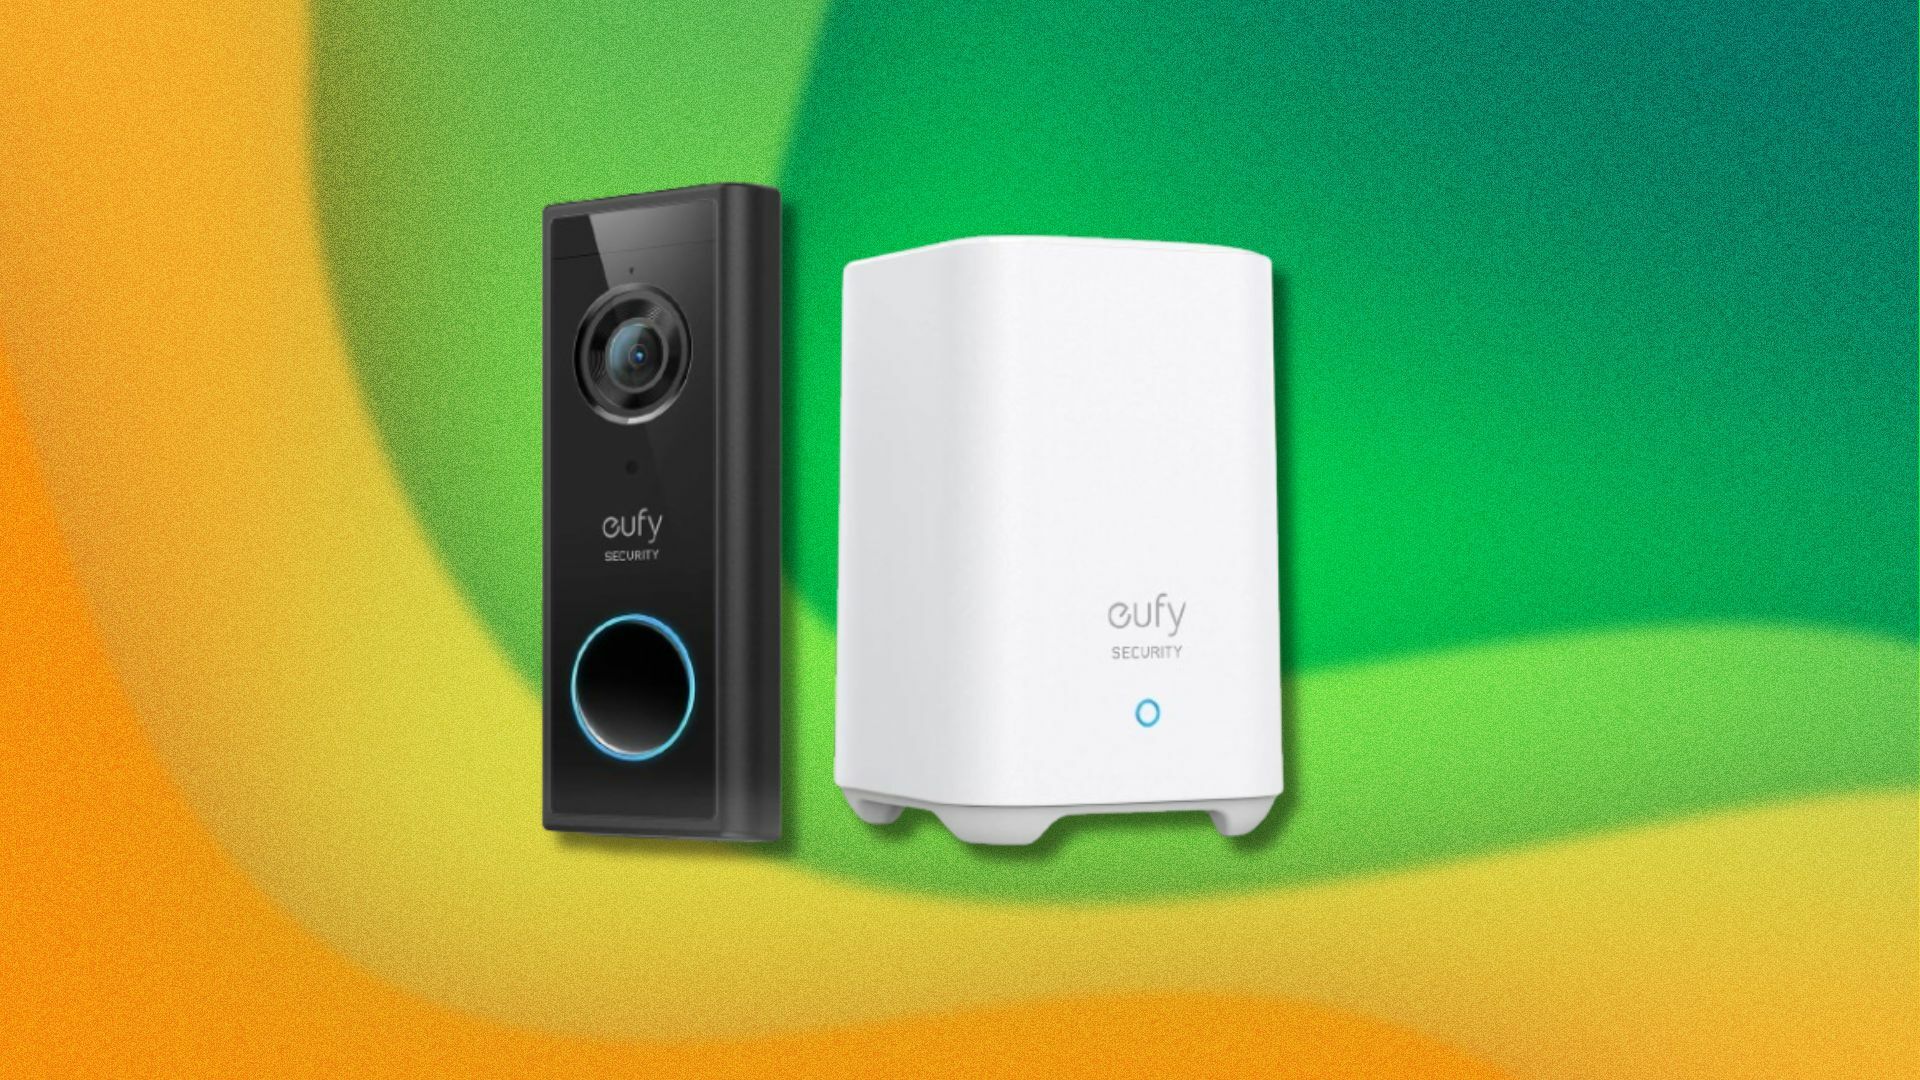 a eufy security video doorbell kit on a yellow and green wavy background